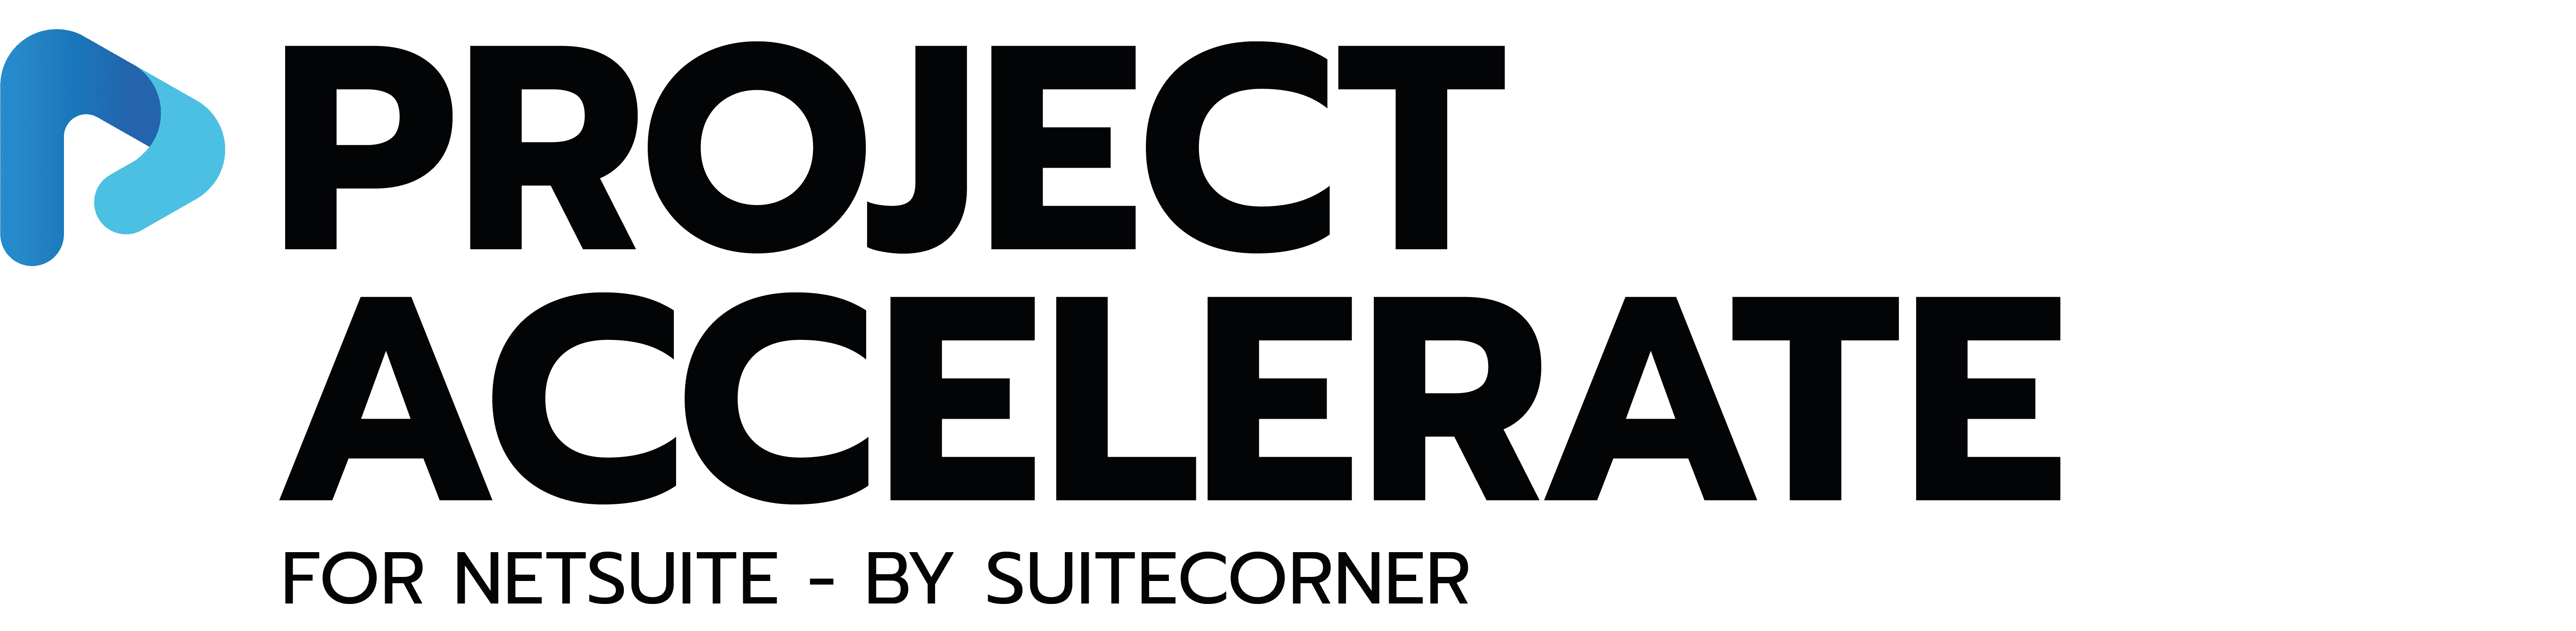 Project_accelerate